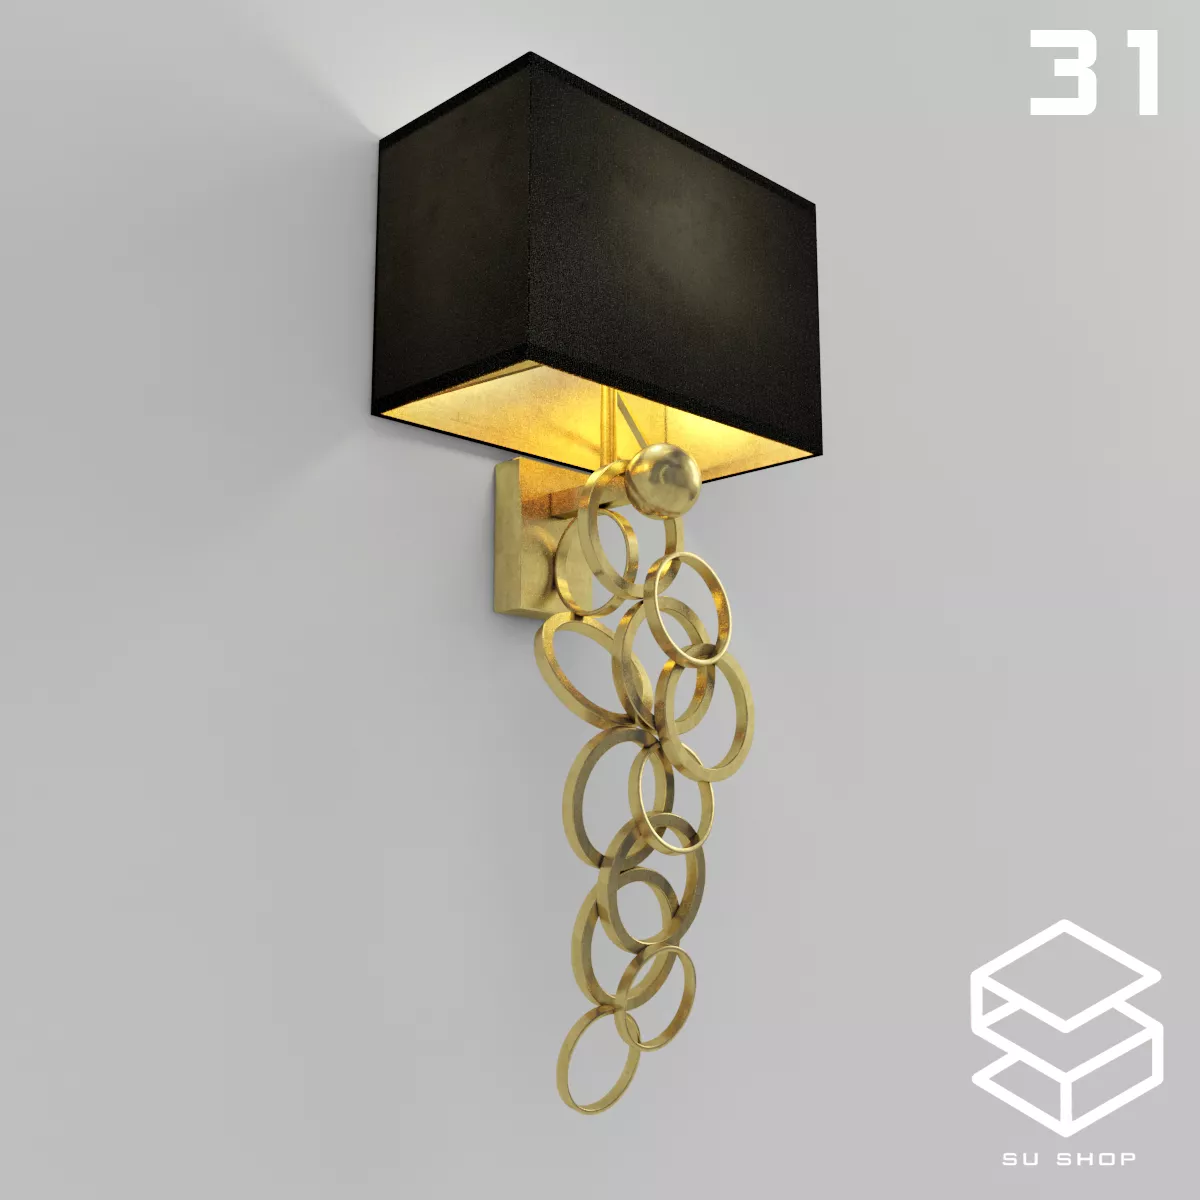 MODERN WALL LAMP - SKETCHUP 3D MODEL - VRAY OR ENSCAPE - ID16283